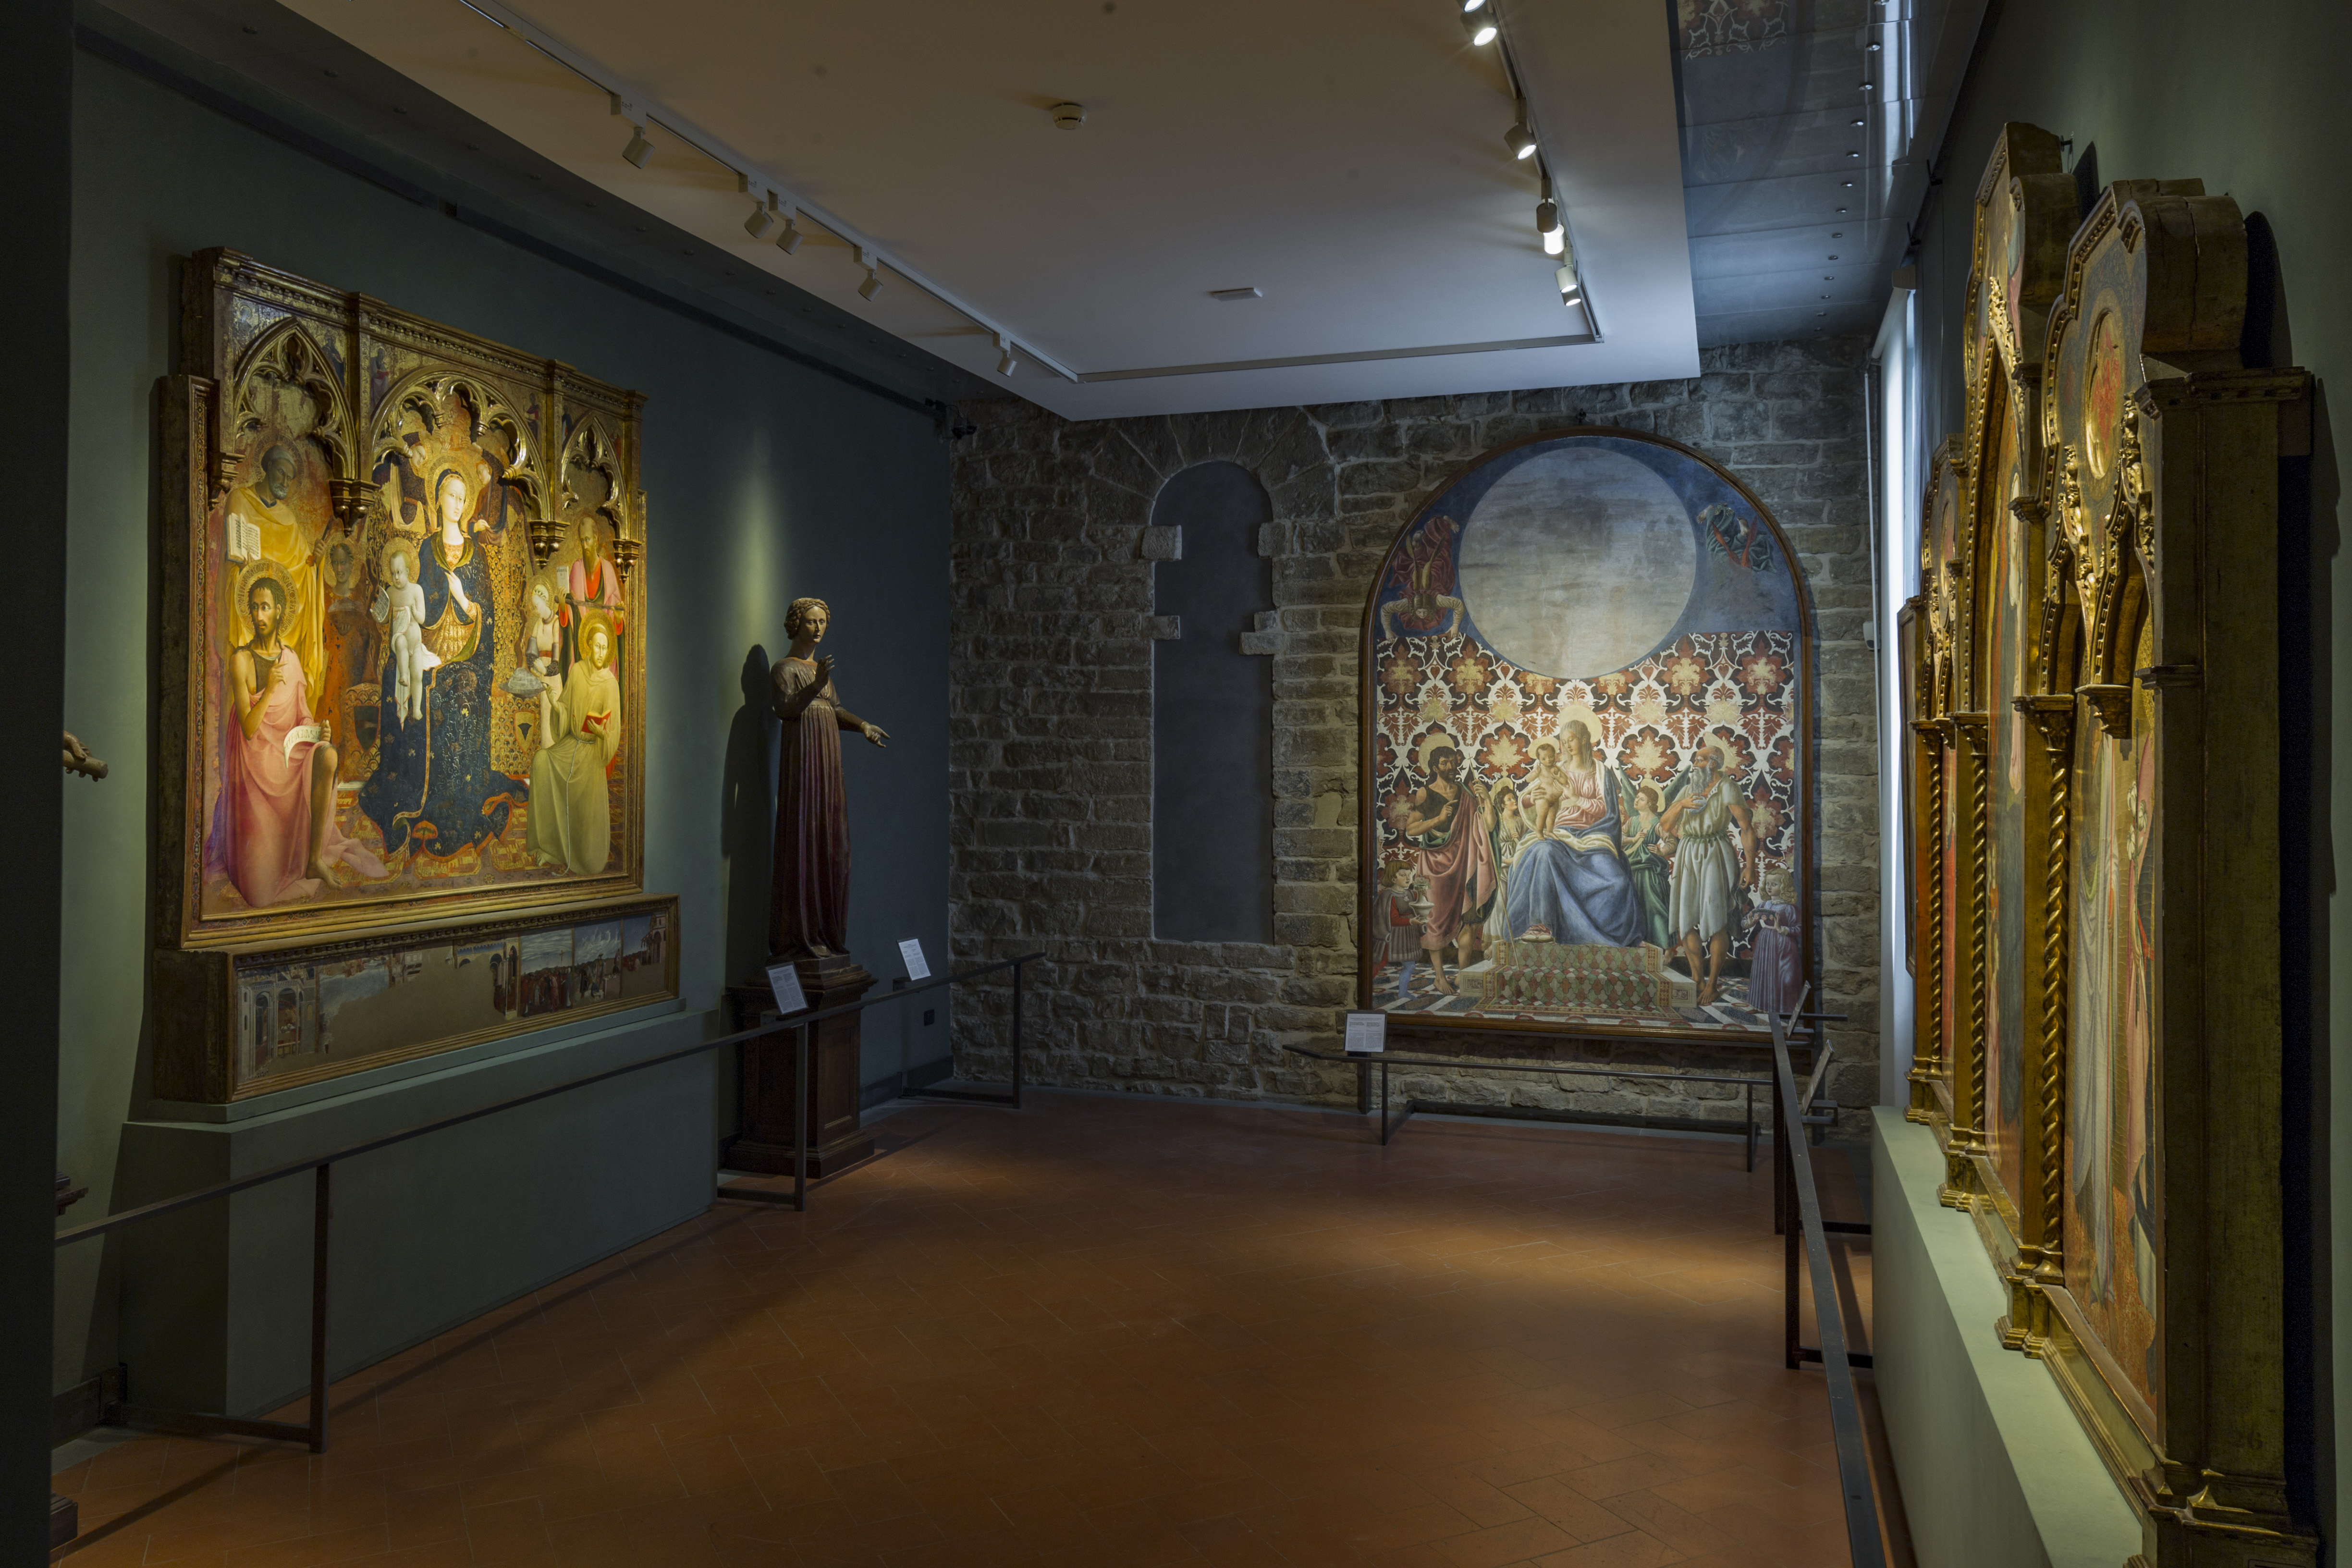 After 49 years, the entire Contini Bonacossi bequest is finally accessible for all visitors to the Uffizi Galleries